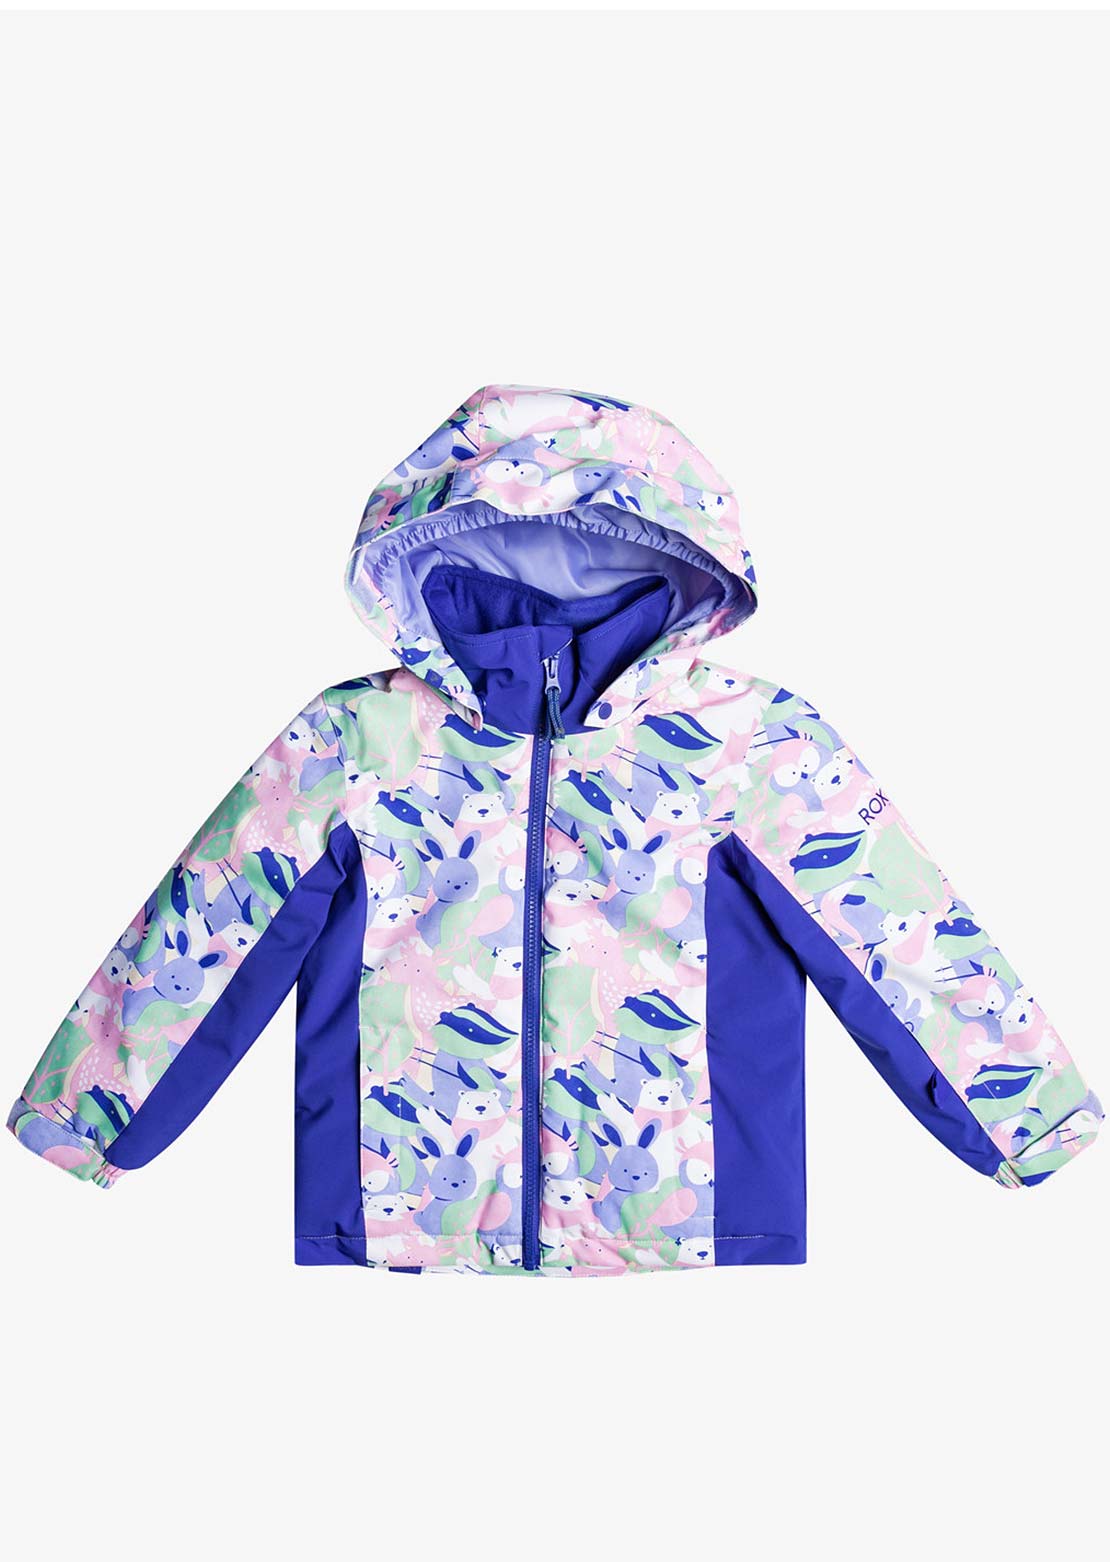 Roxy Toddler Snowy Tale Jacket Bright White Mountains Locals